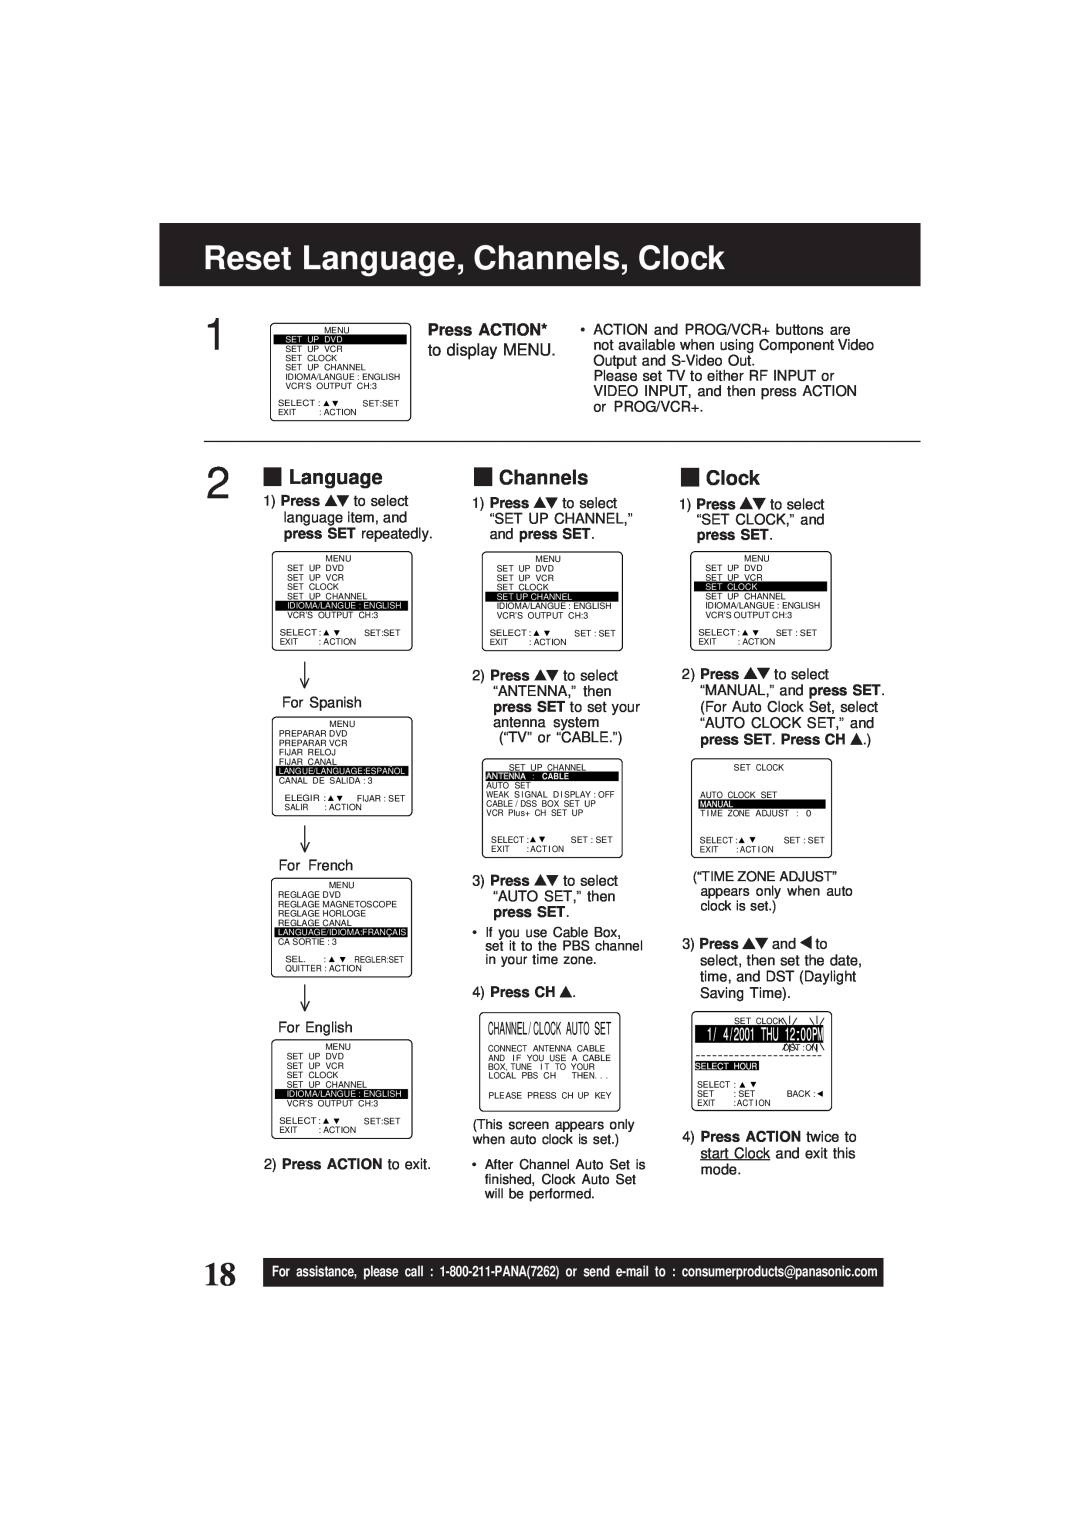 Panasonic PV-D4761 Reset Language, Channels, Clock, to display MENU, Press ACTION to exit, Press CH 